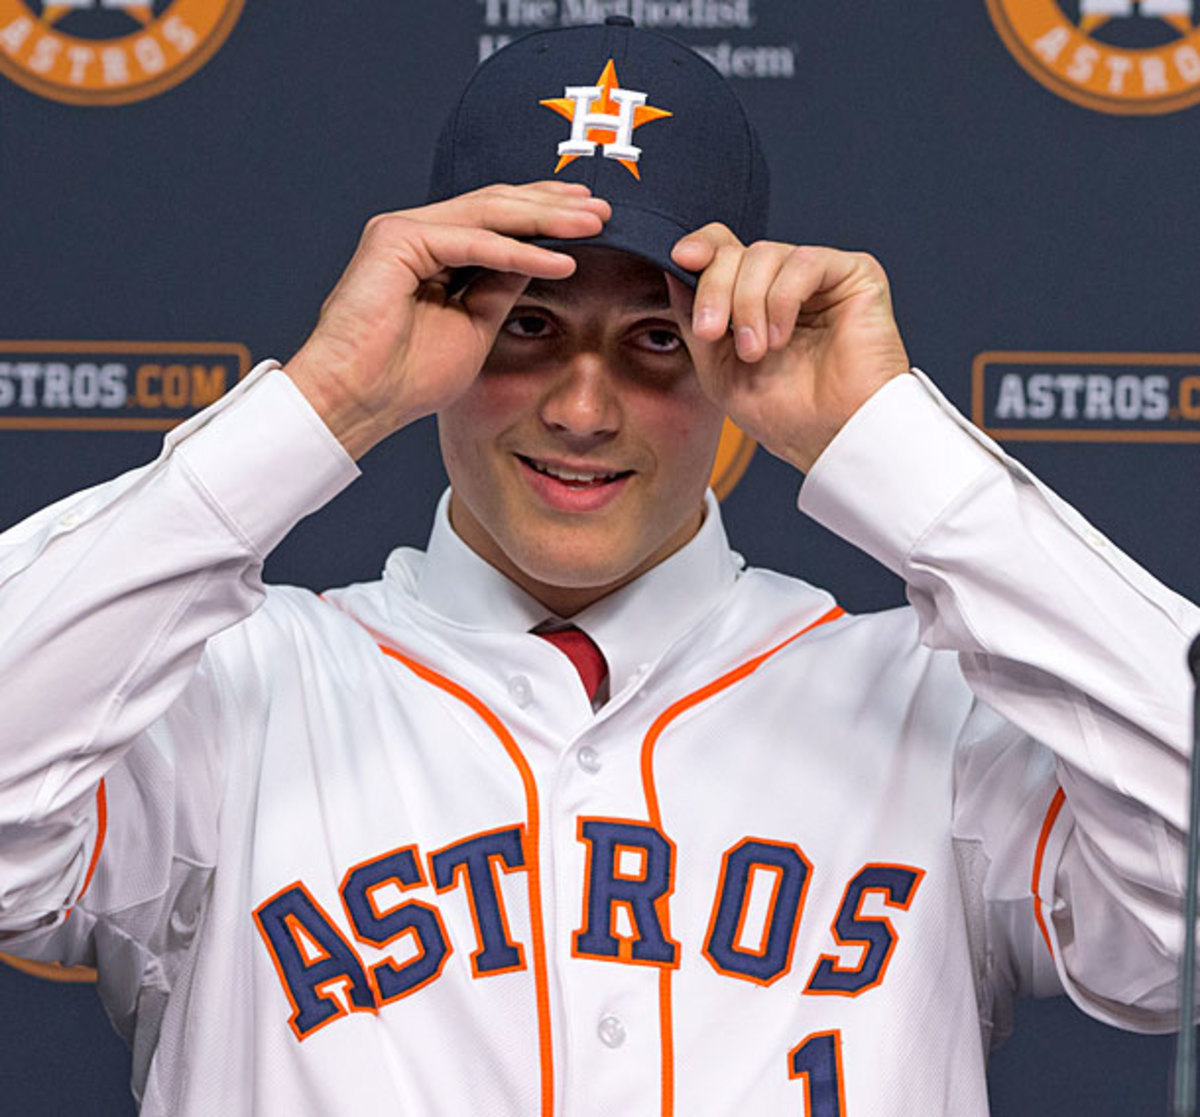 Appel signing another shrewd move by Astros, who are rebuilding